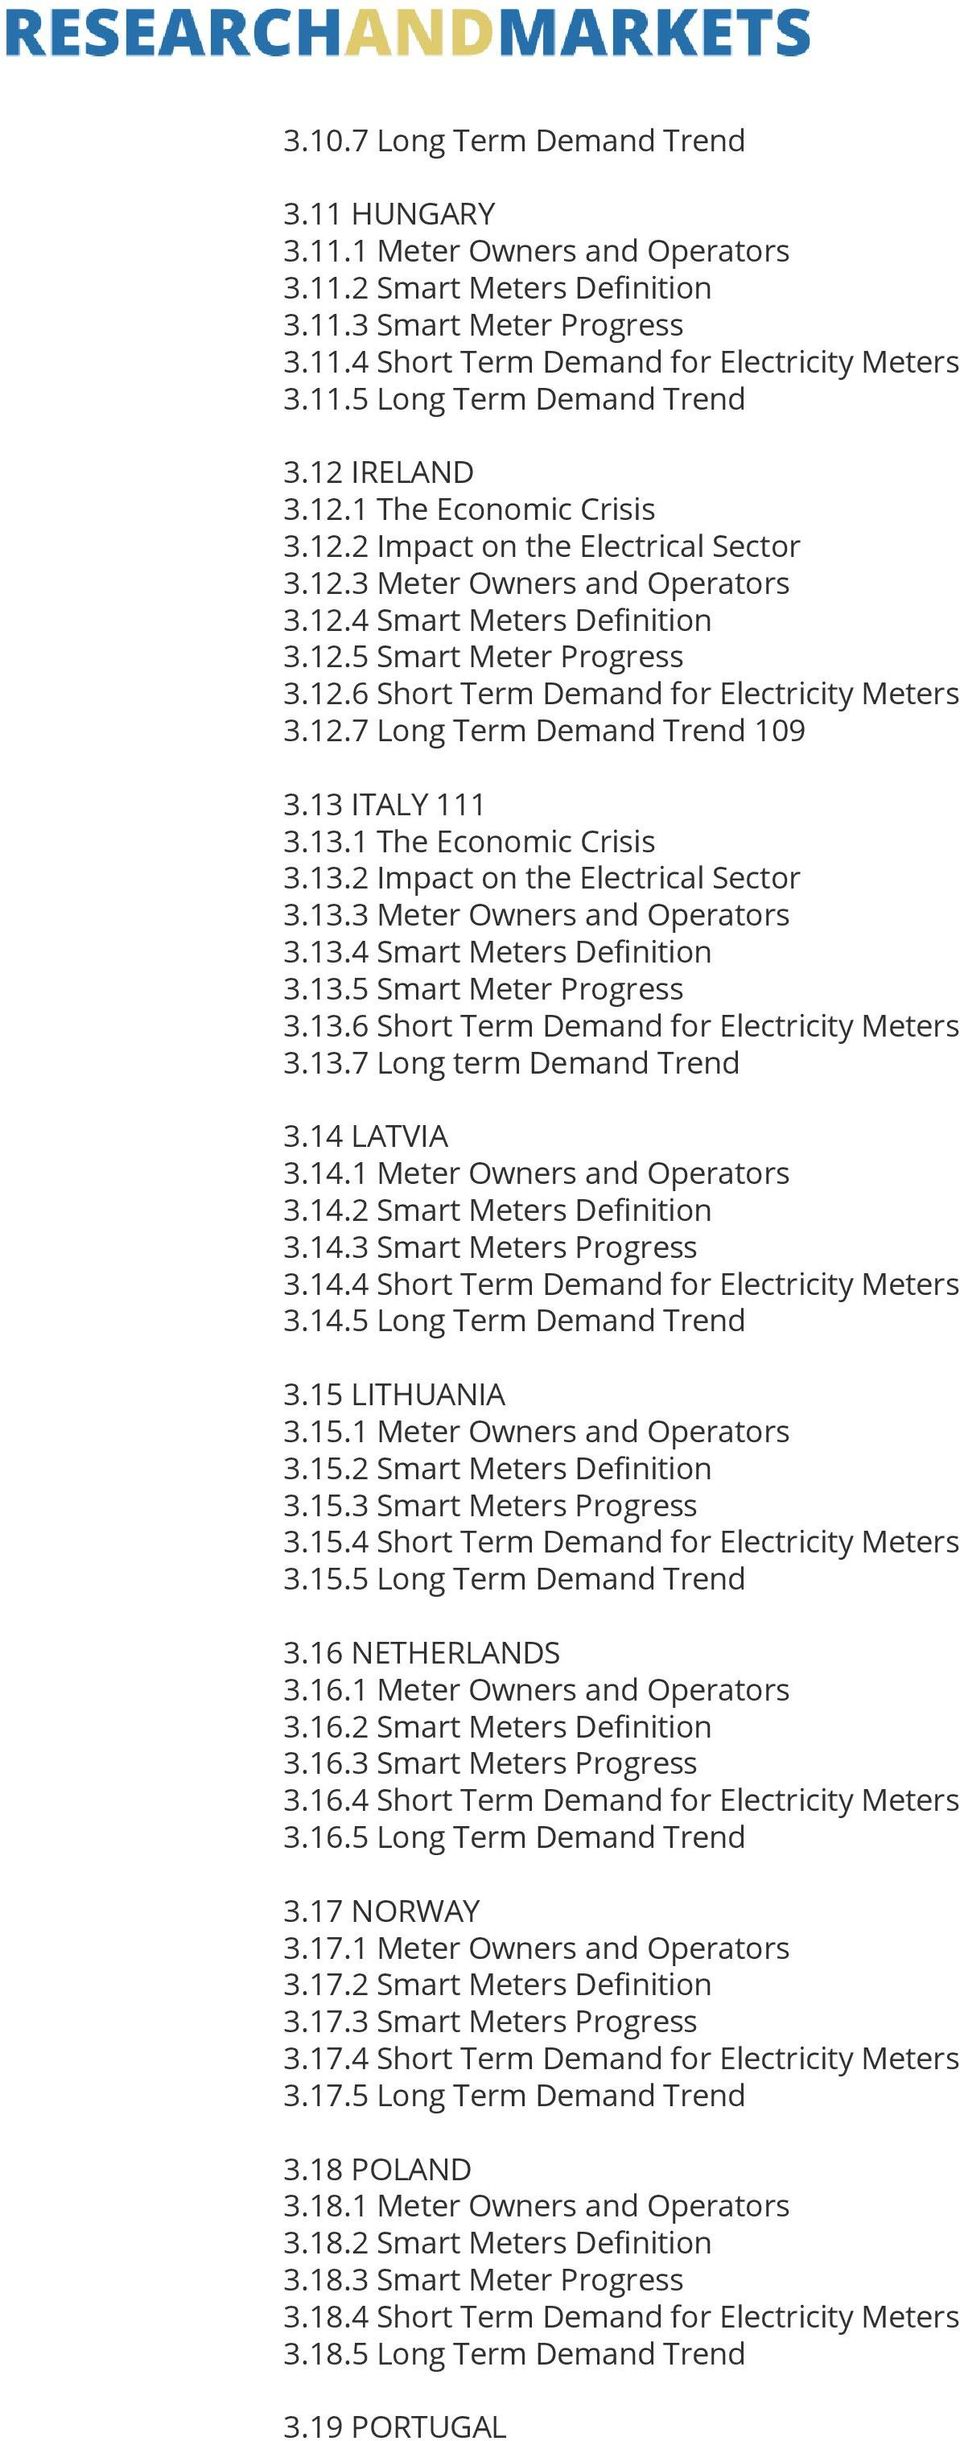 12.7 Long Term Demand Trend 109 3.13 ITALY 111 3.13.1 The Economic Crisis 3.13.2 Impact on the Electrical Sector 3.13.3 Meter Owners and Operators 3.13.4 Smart Meters Definition 3.13.5 Smart Meter Progress 3.